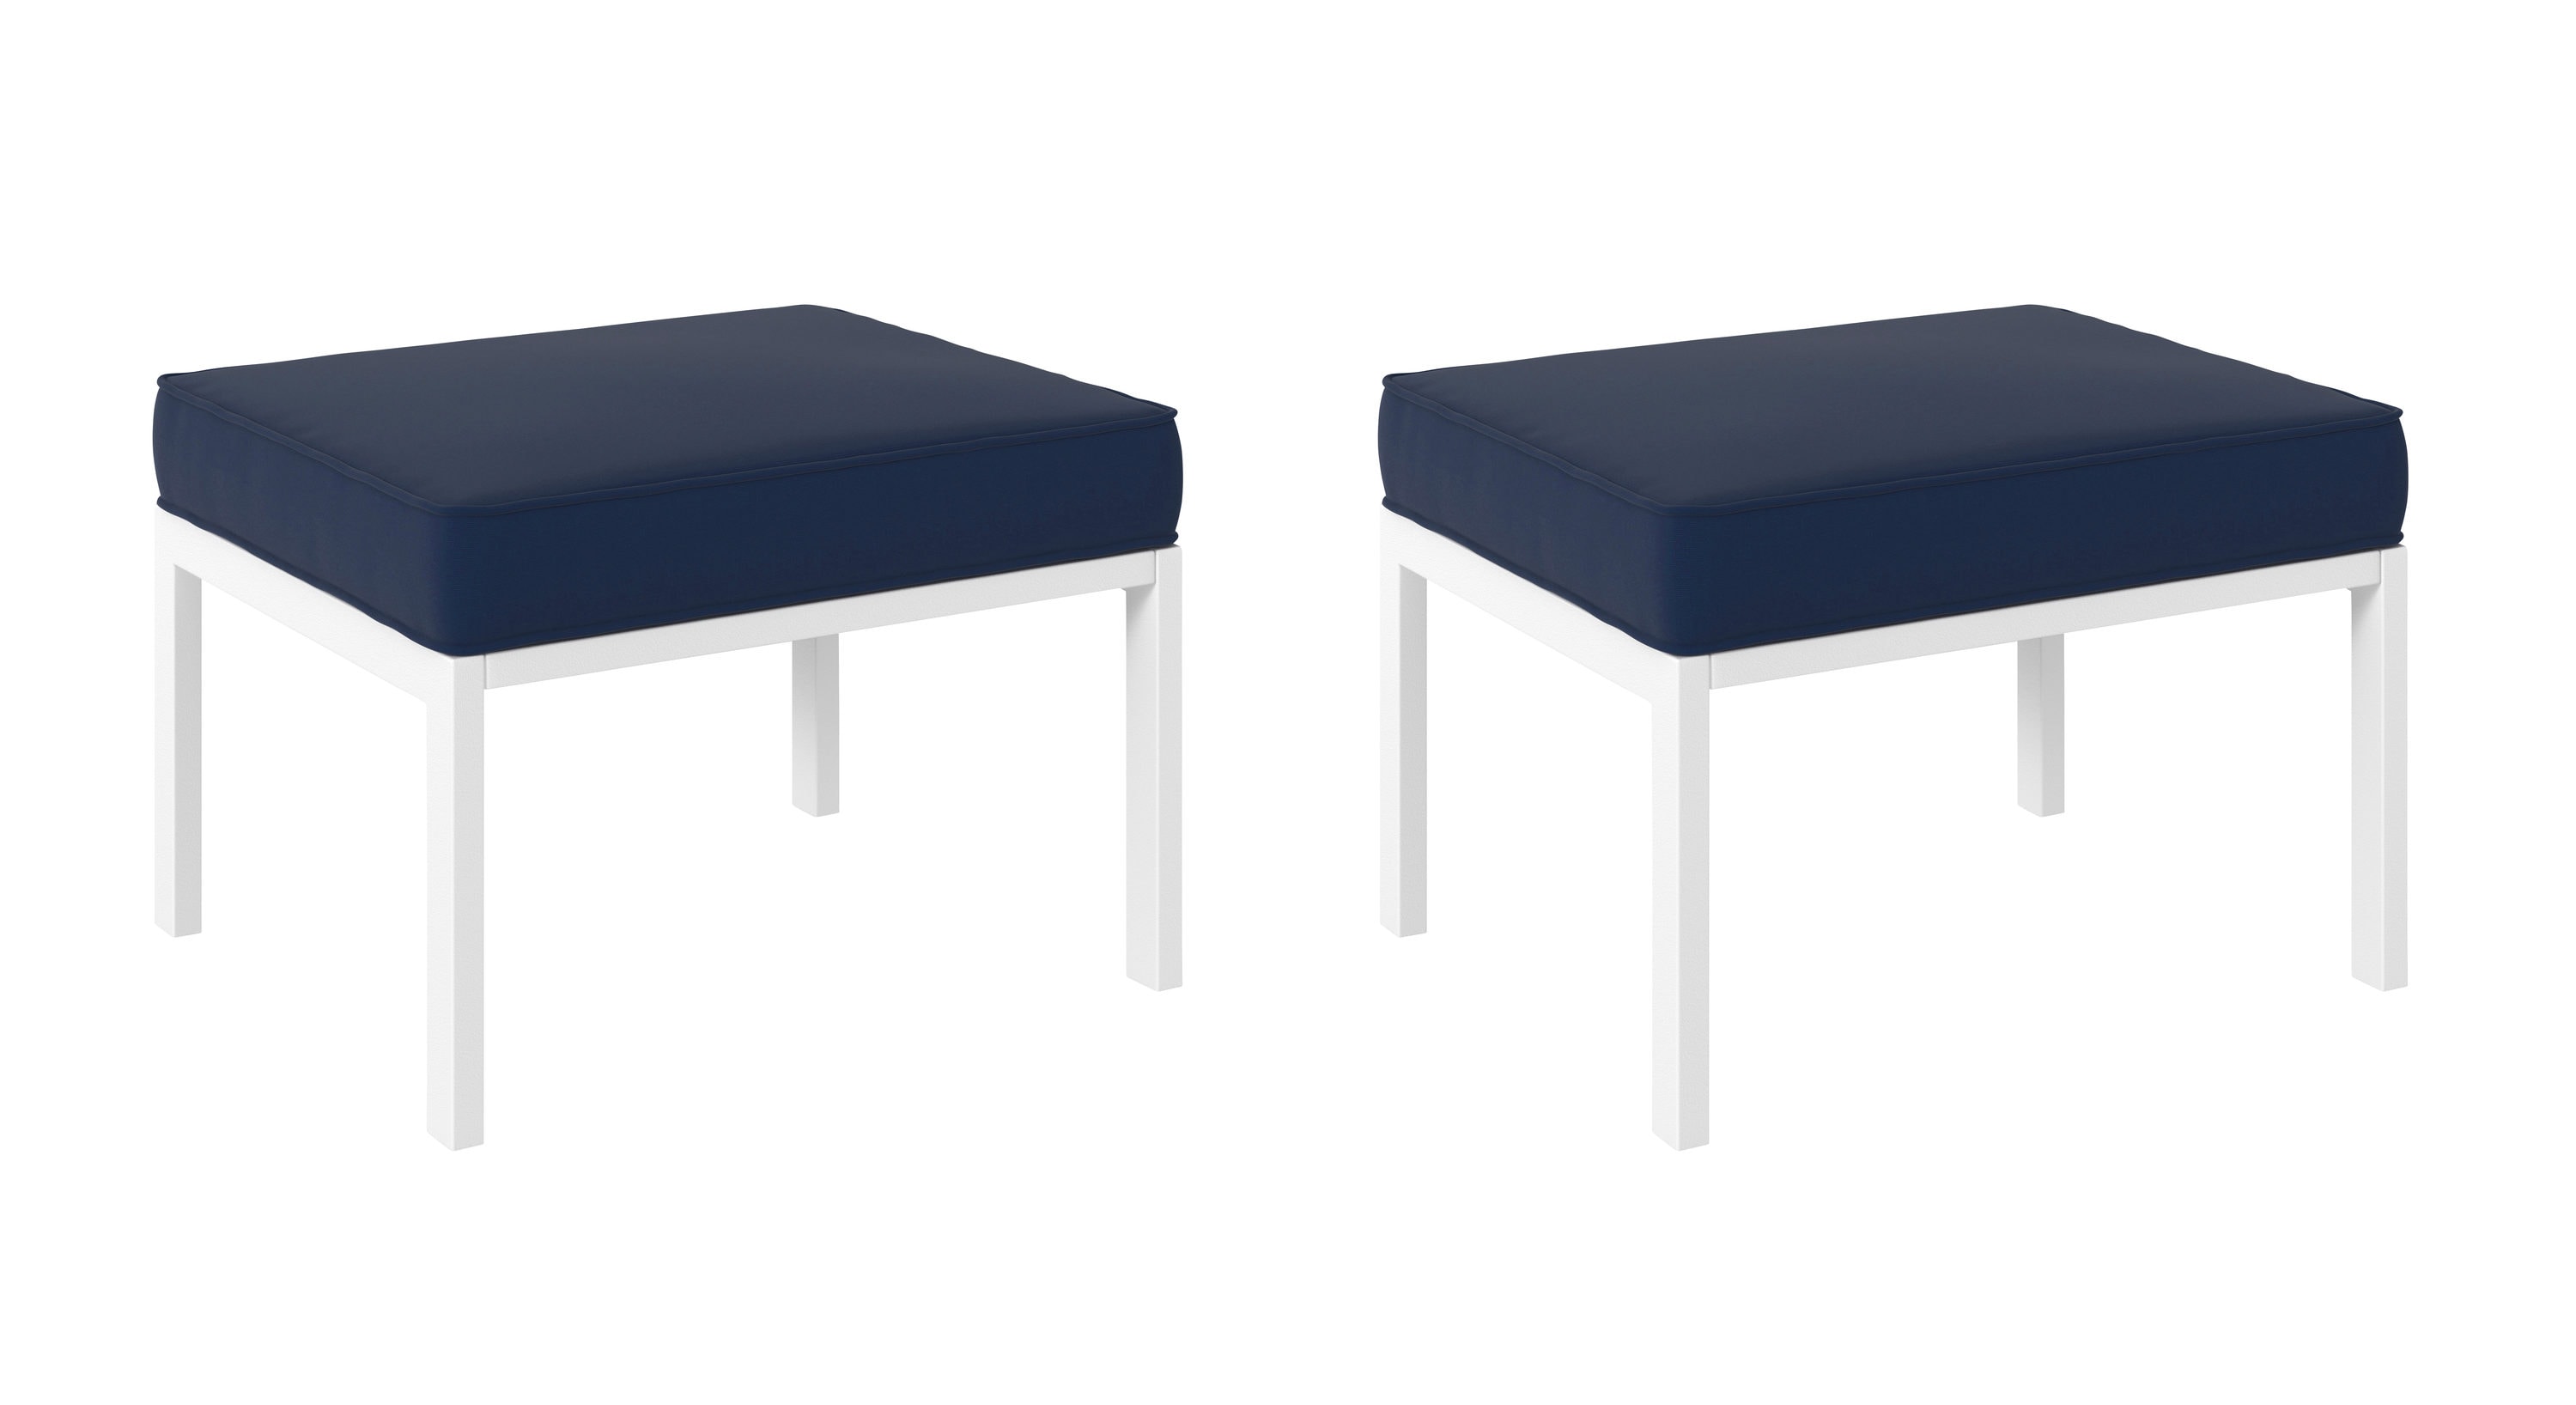 Set of 2 allen + roth Marsh Cove White Aluminum Ottomans w/ Blue Cushions $49.50 + Free Shipping